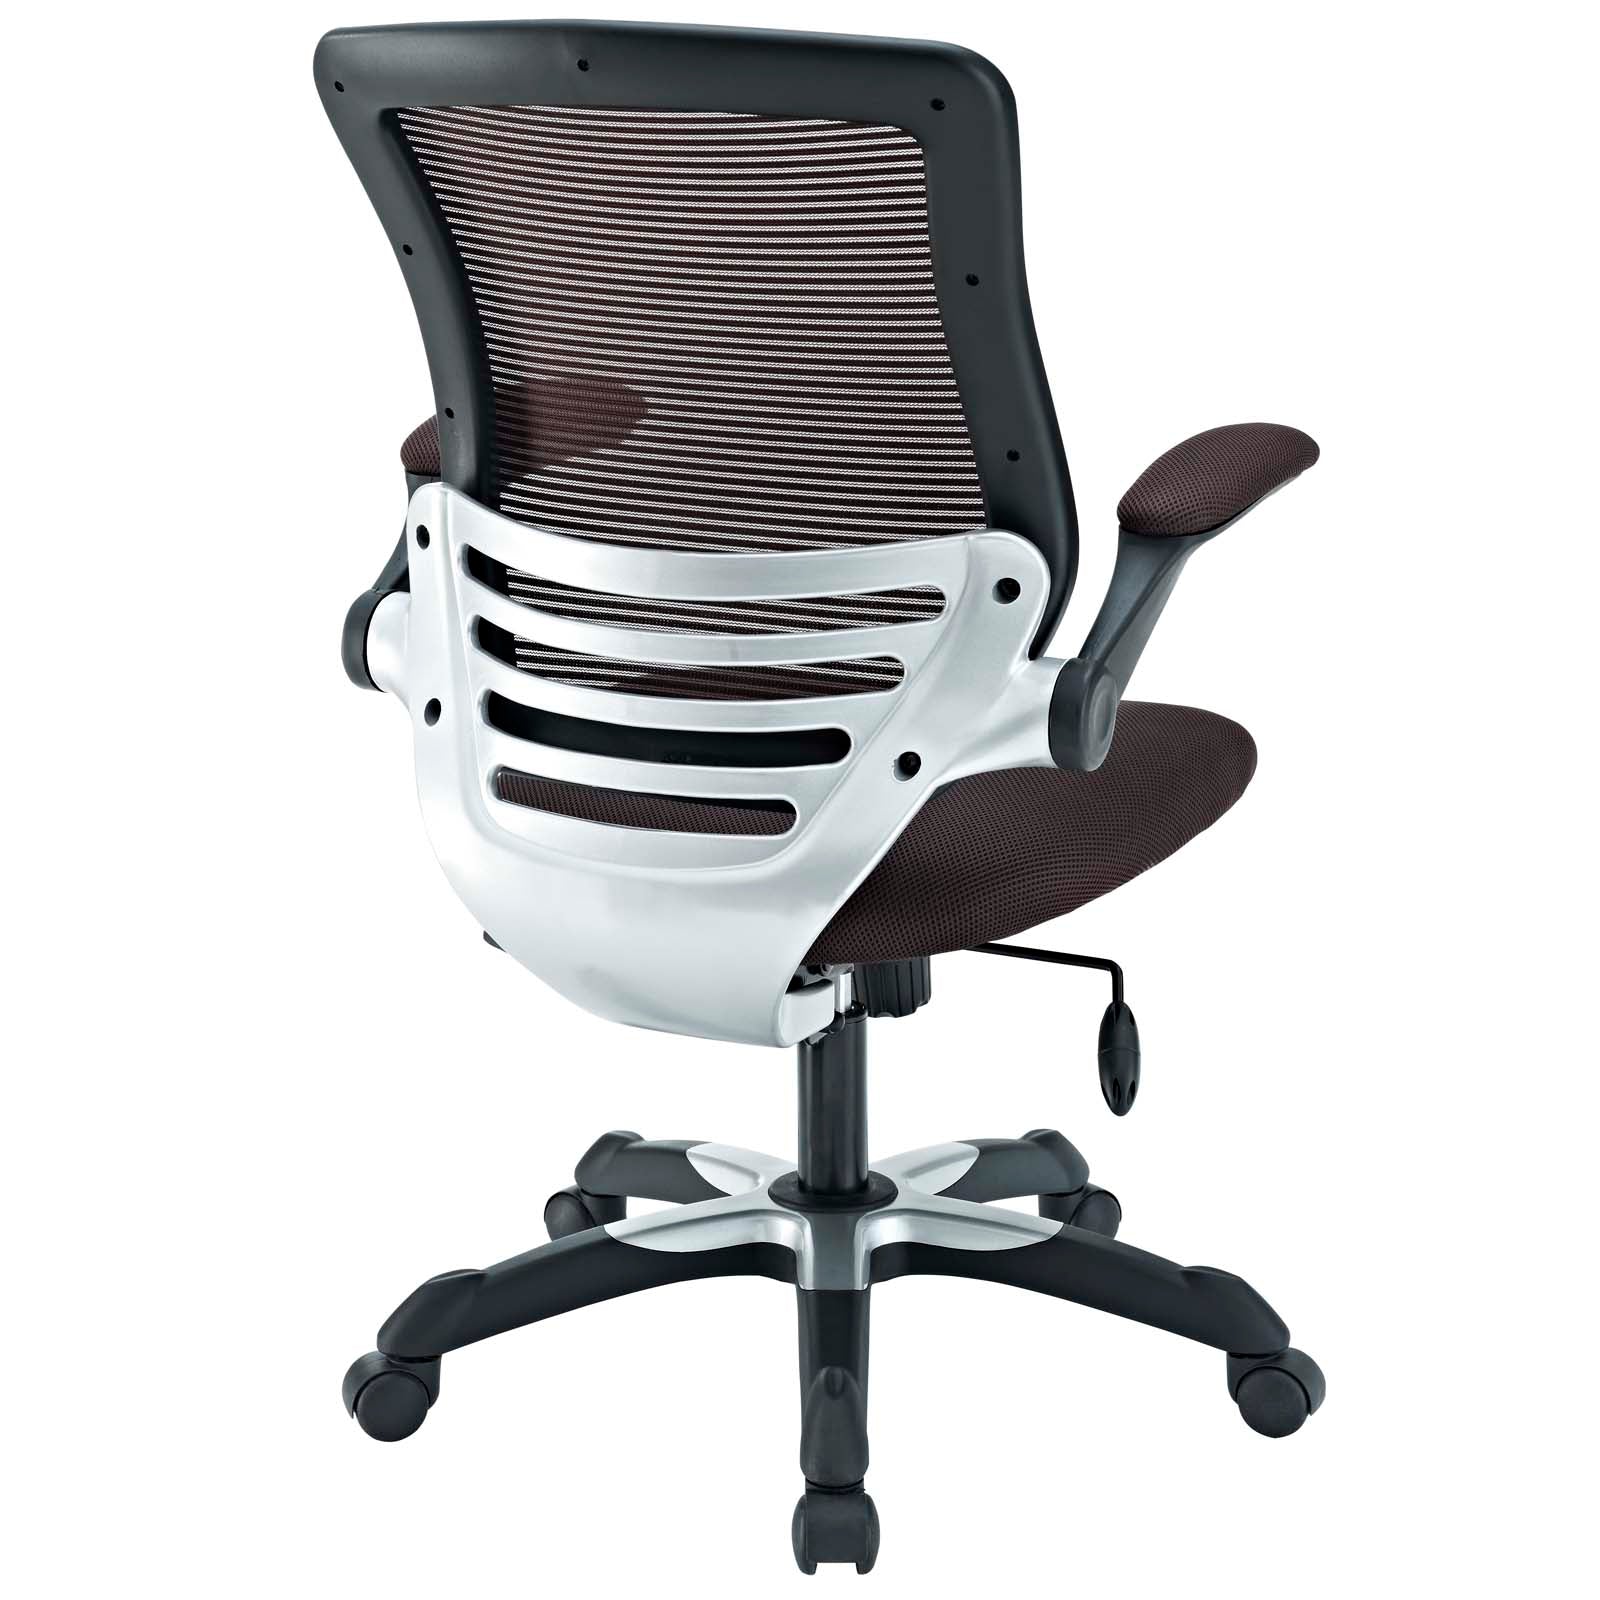 Modway Task Chairs - Edge Mesh Office Chair Brown